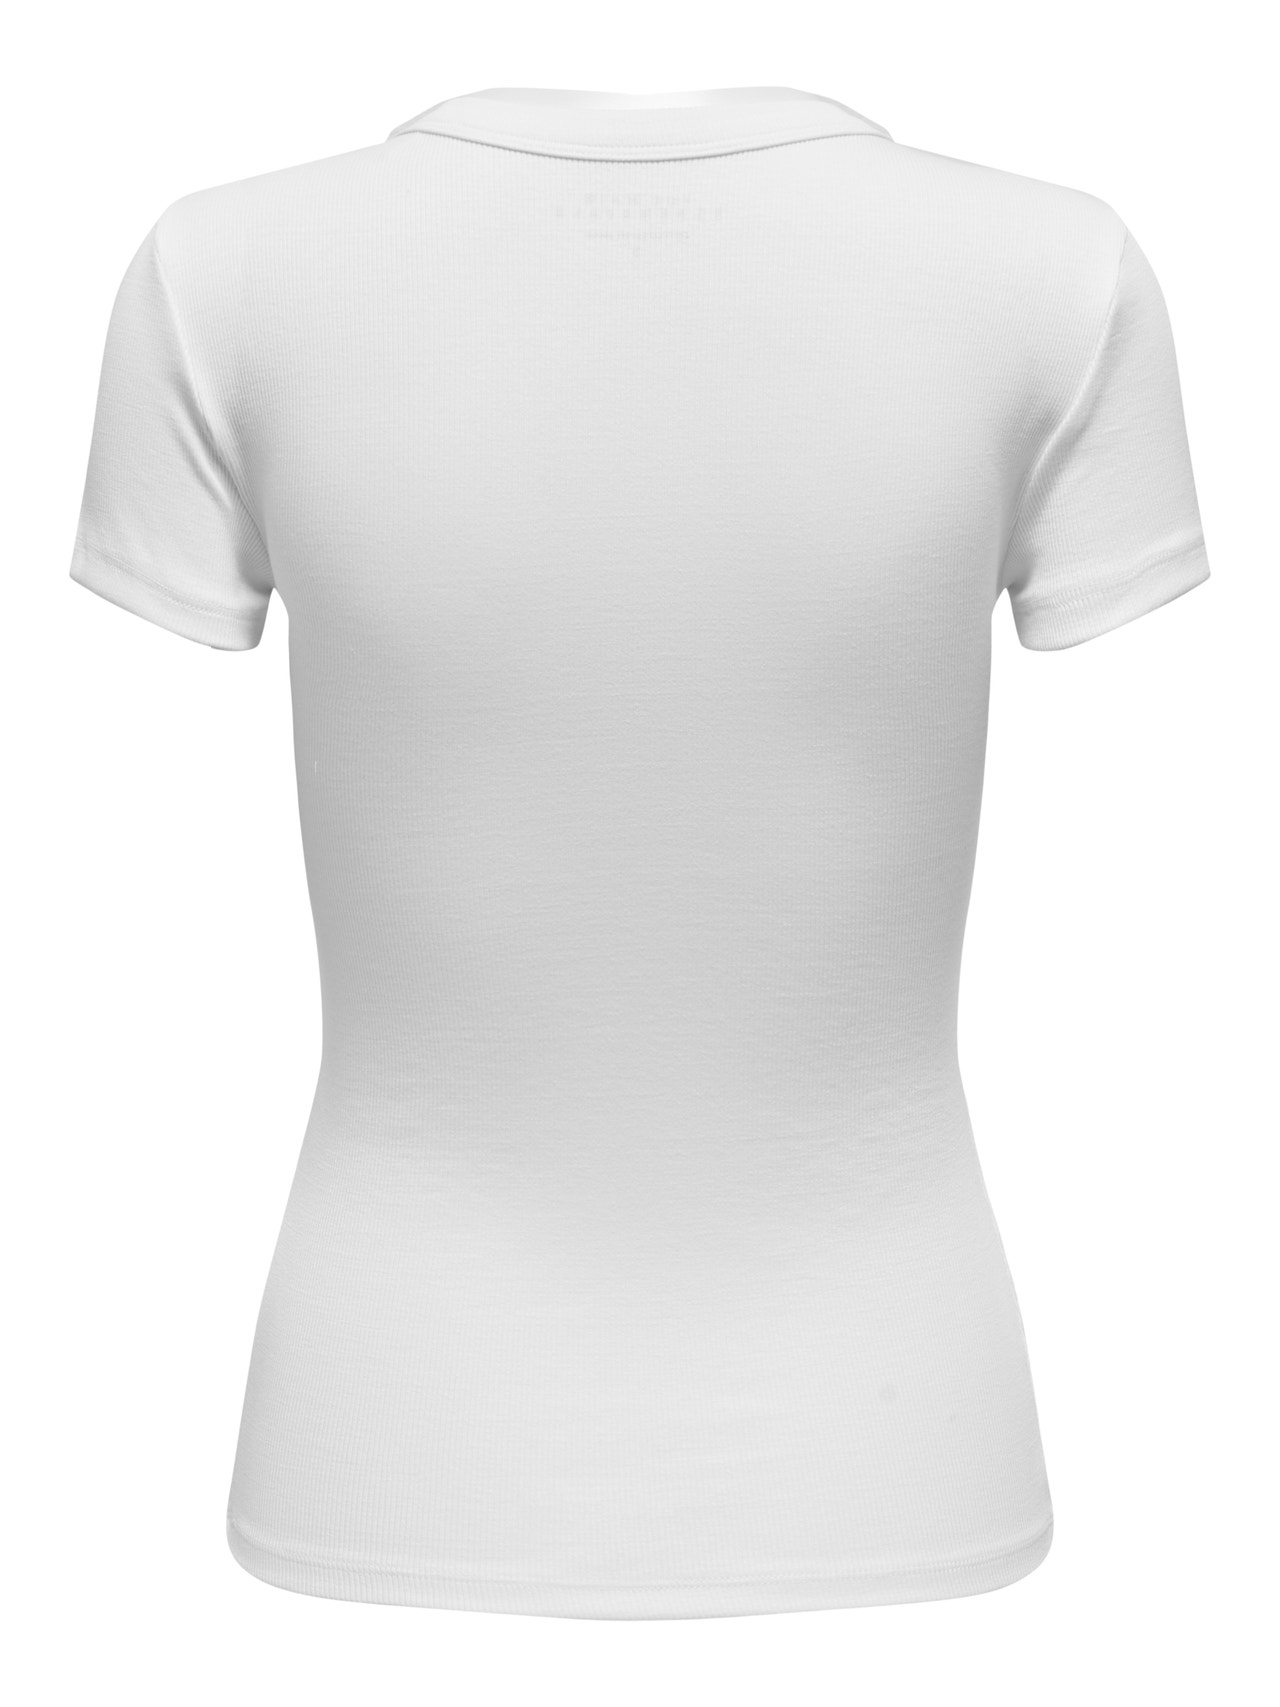 ONLY Regular Fit Round Neck Top -Bright White - 15330639